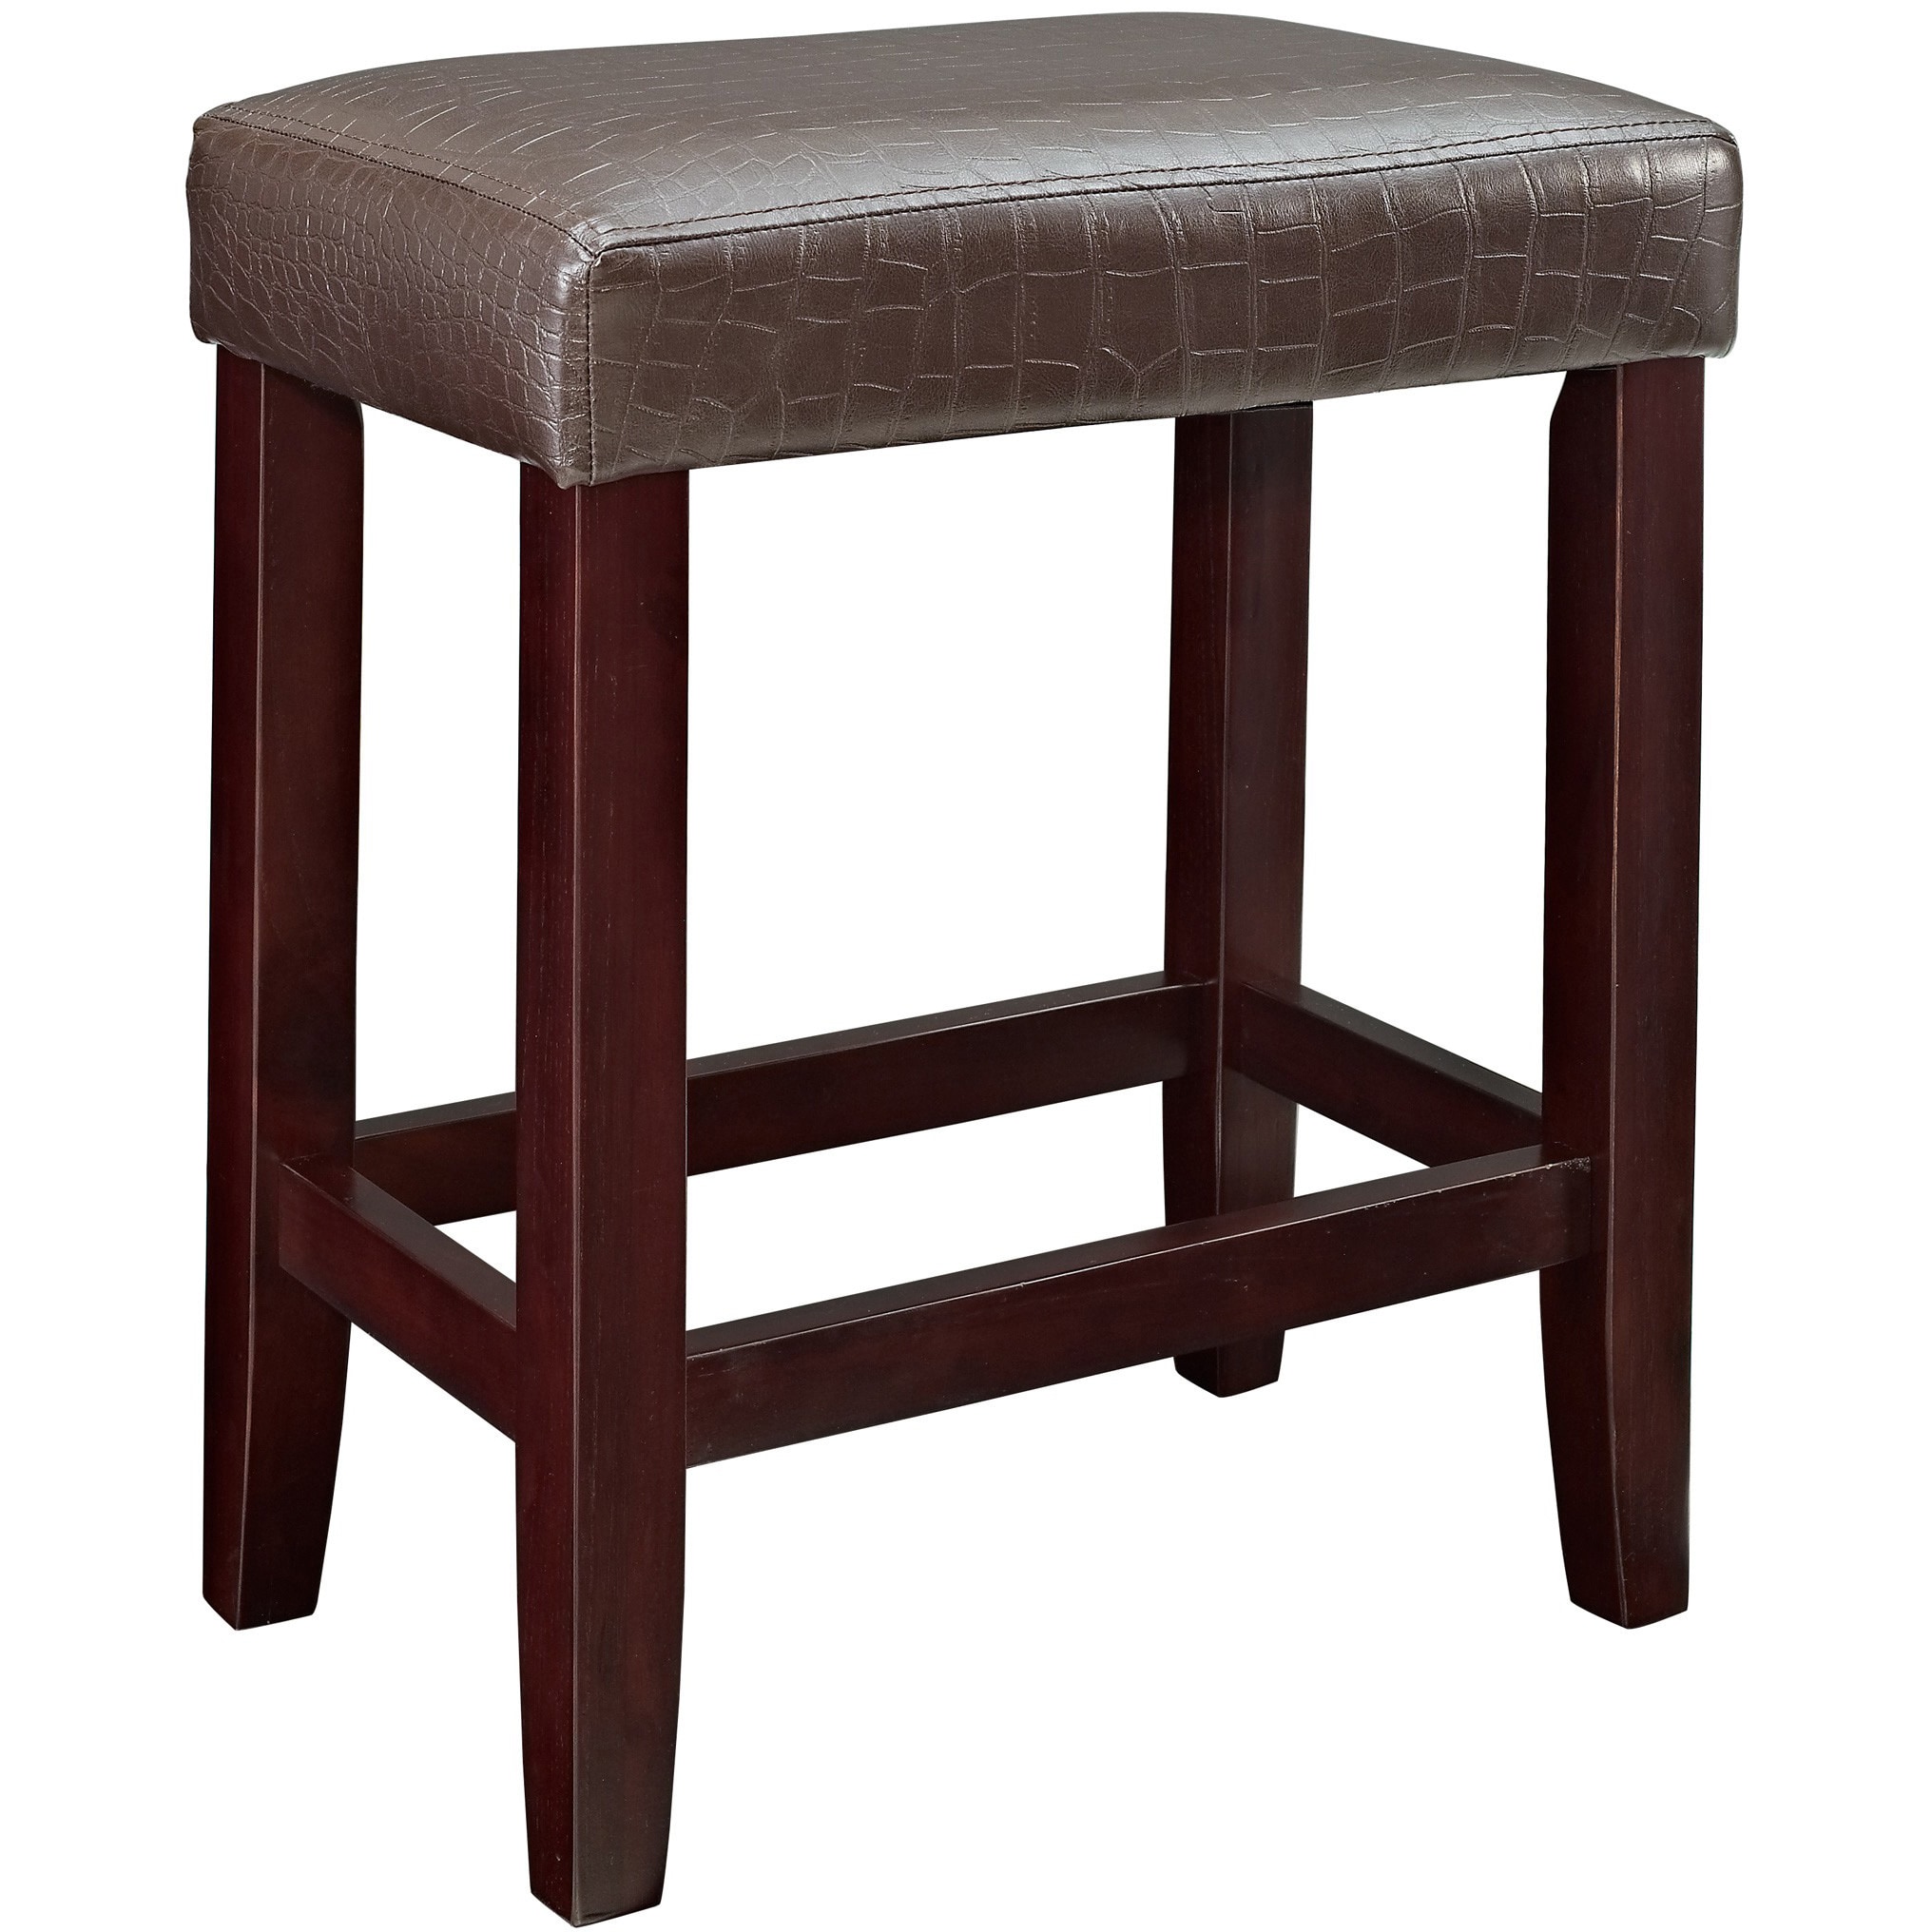 Black Croc Faux Leather Counter Stool